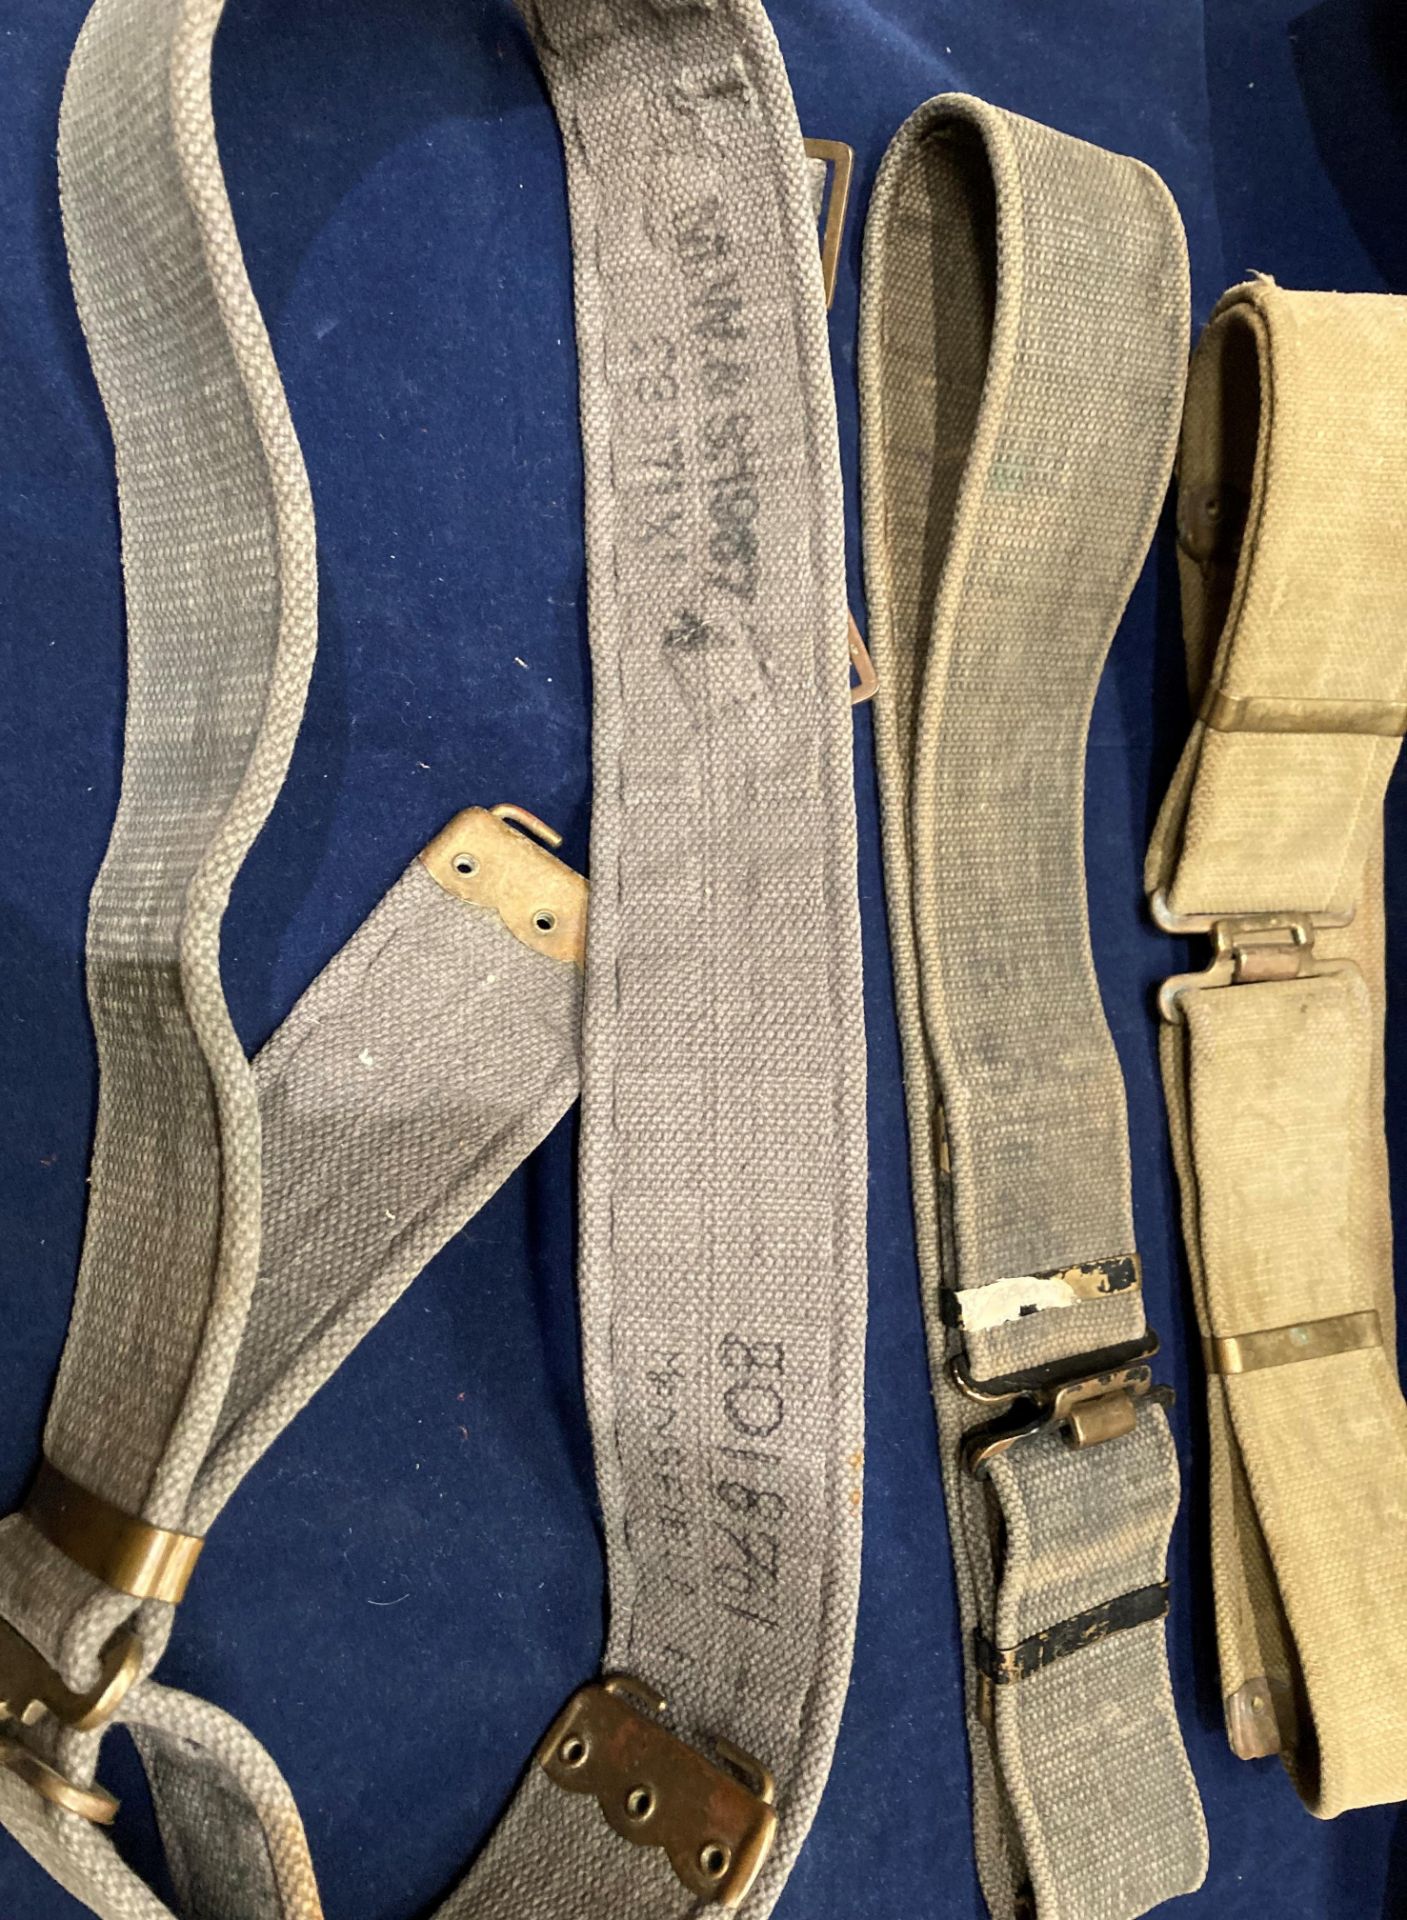 Two World War II British Army 37 pattern belts (one khaki and one grey) and a belt/utility strap - Image 3 of 3